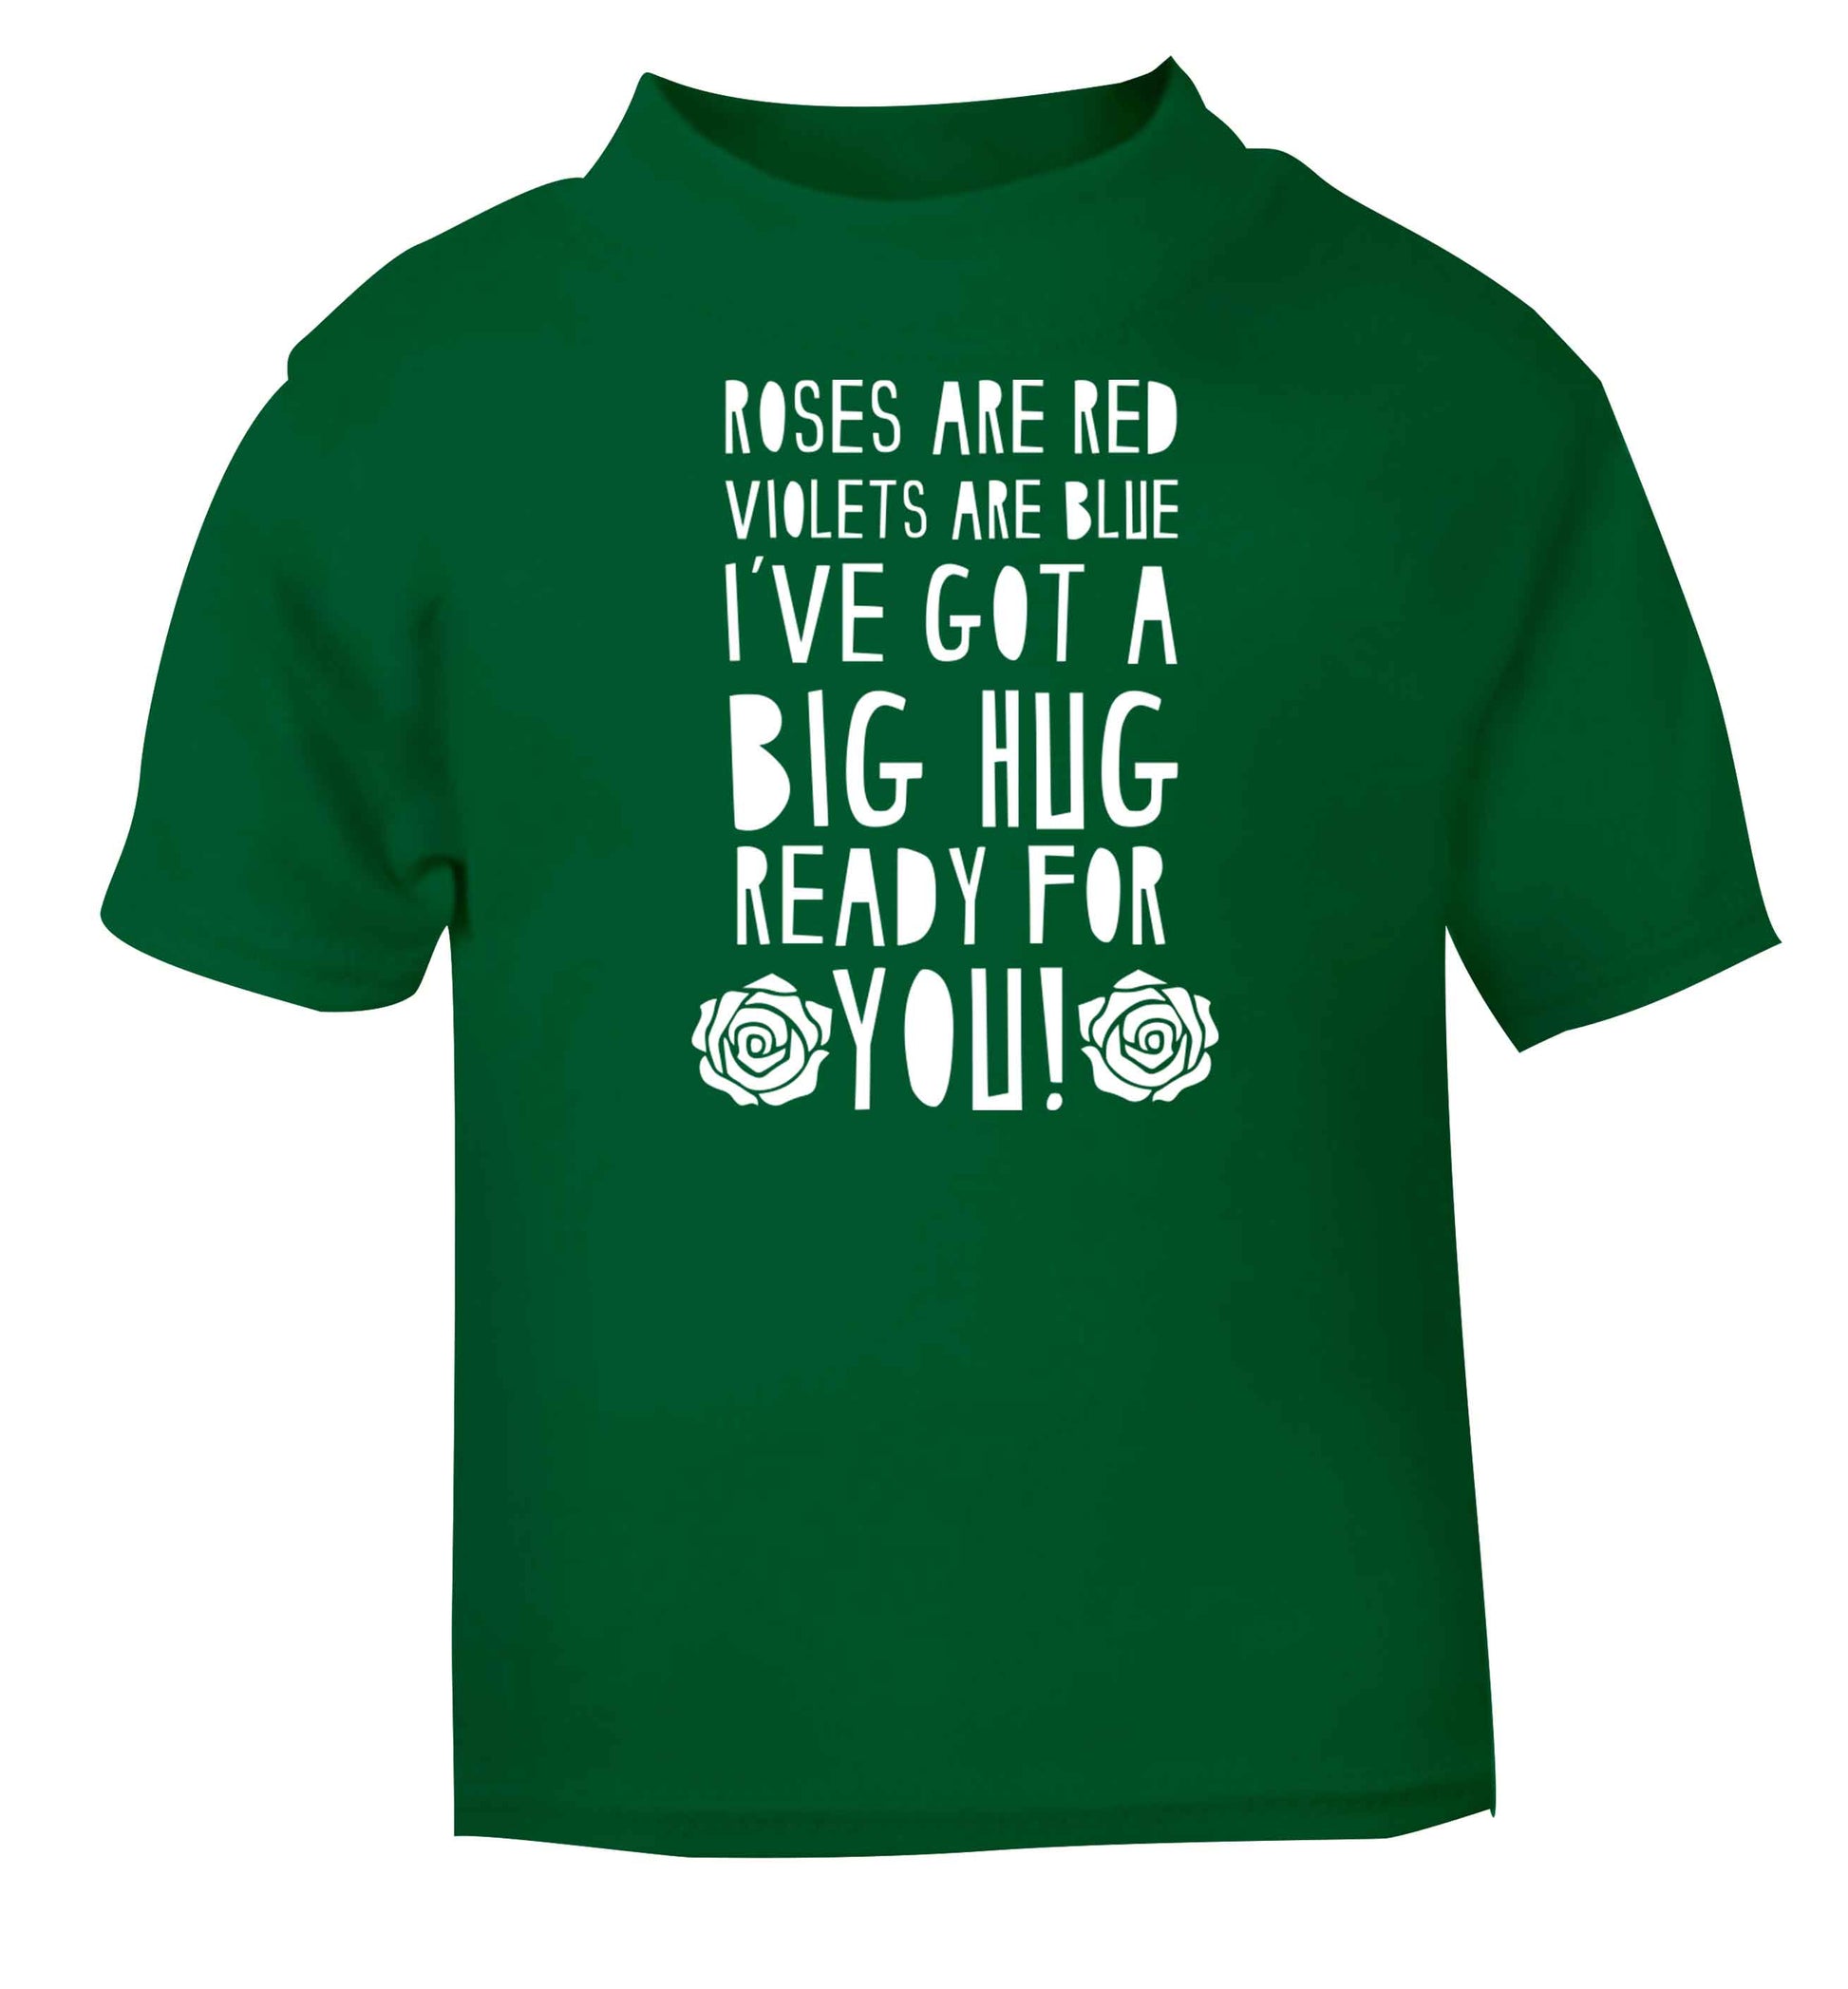 Roses are red violets are blue I've got a big hug coming for you green baby toddler Tshirt 2 Years